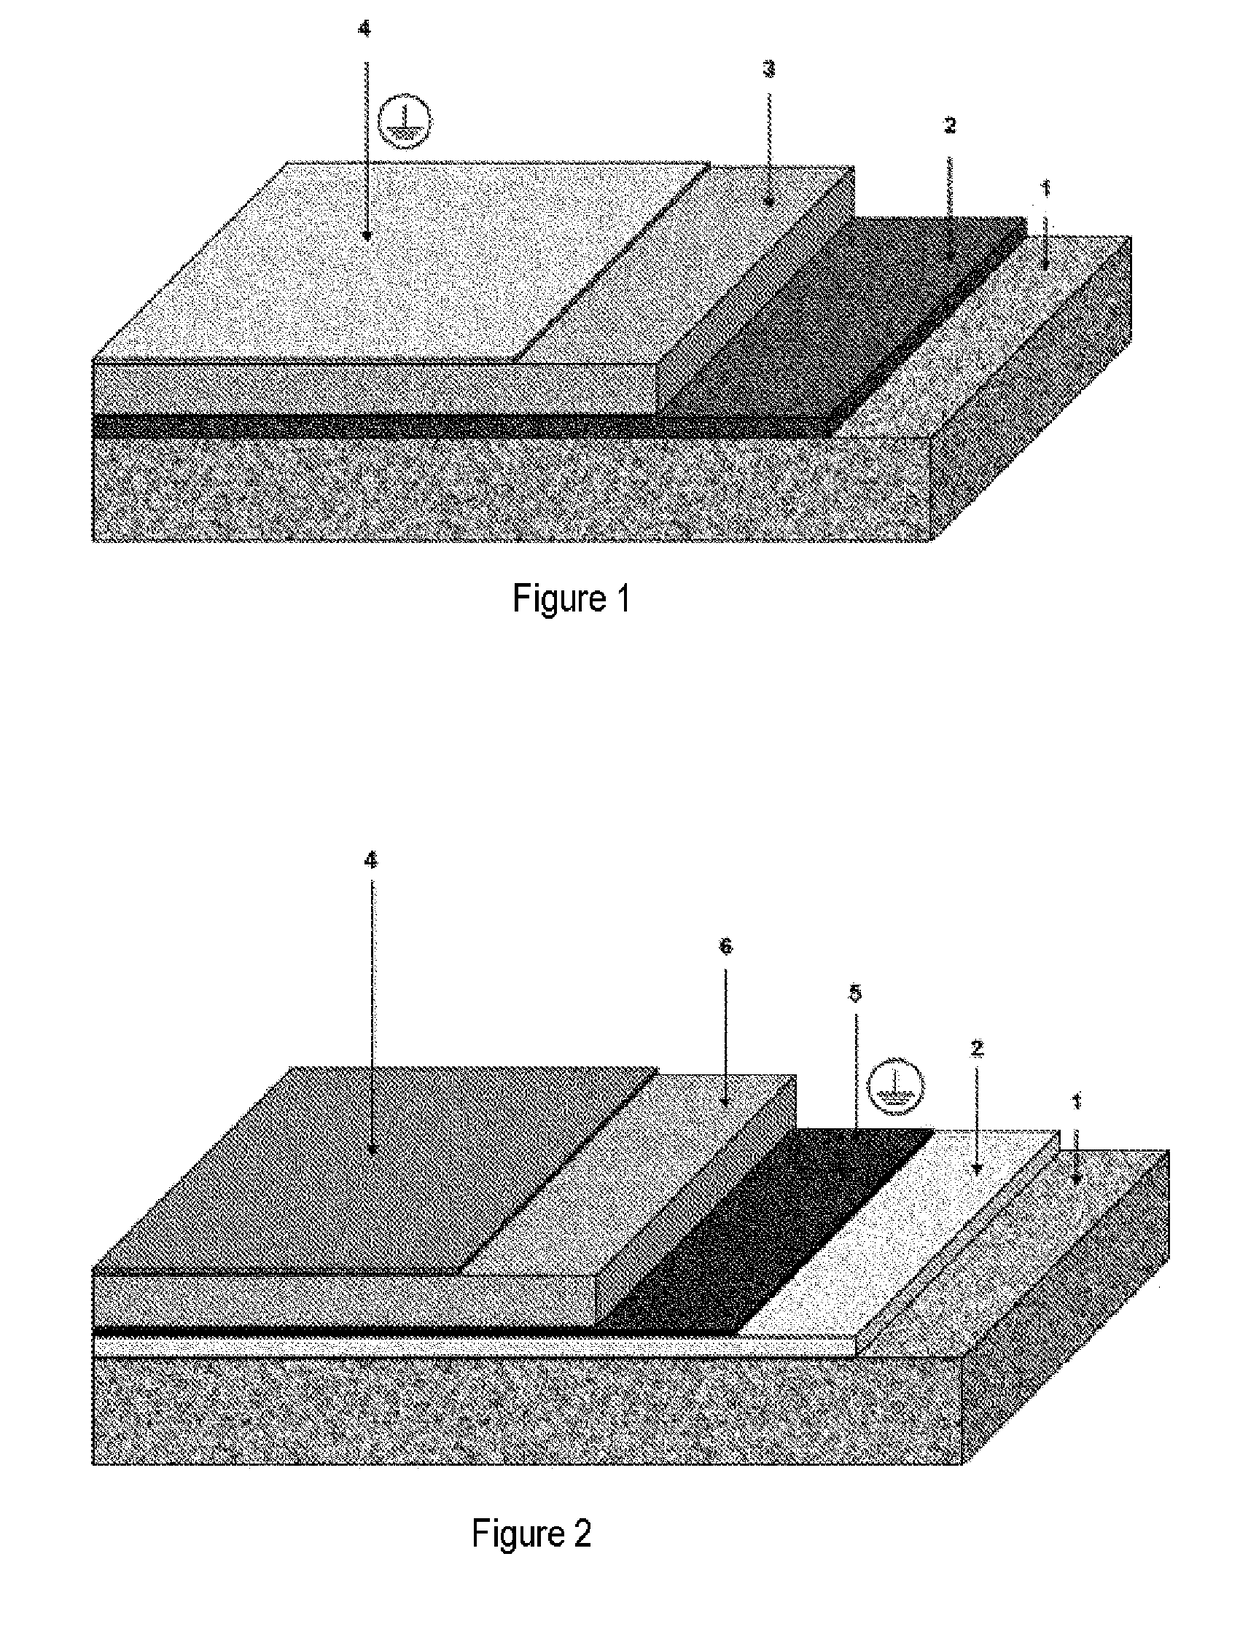 Epoxy resin-containing cement-bound composition for electrically conductive coatings or seal coats